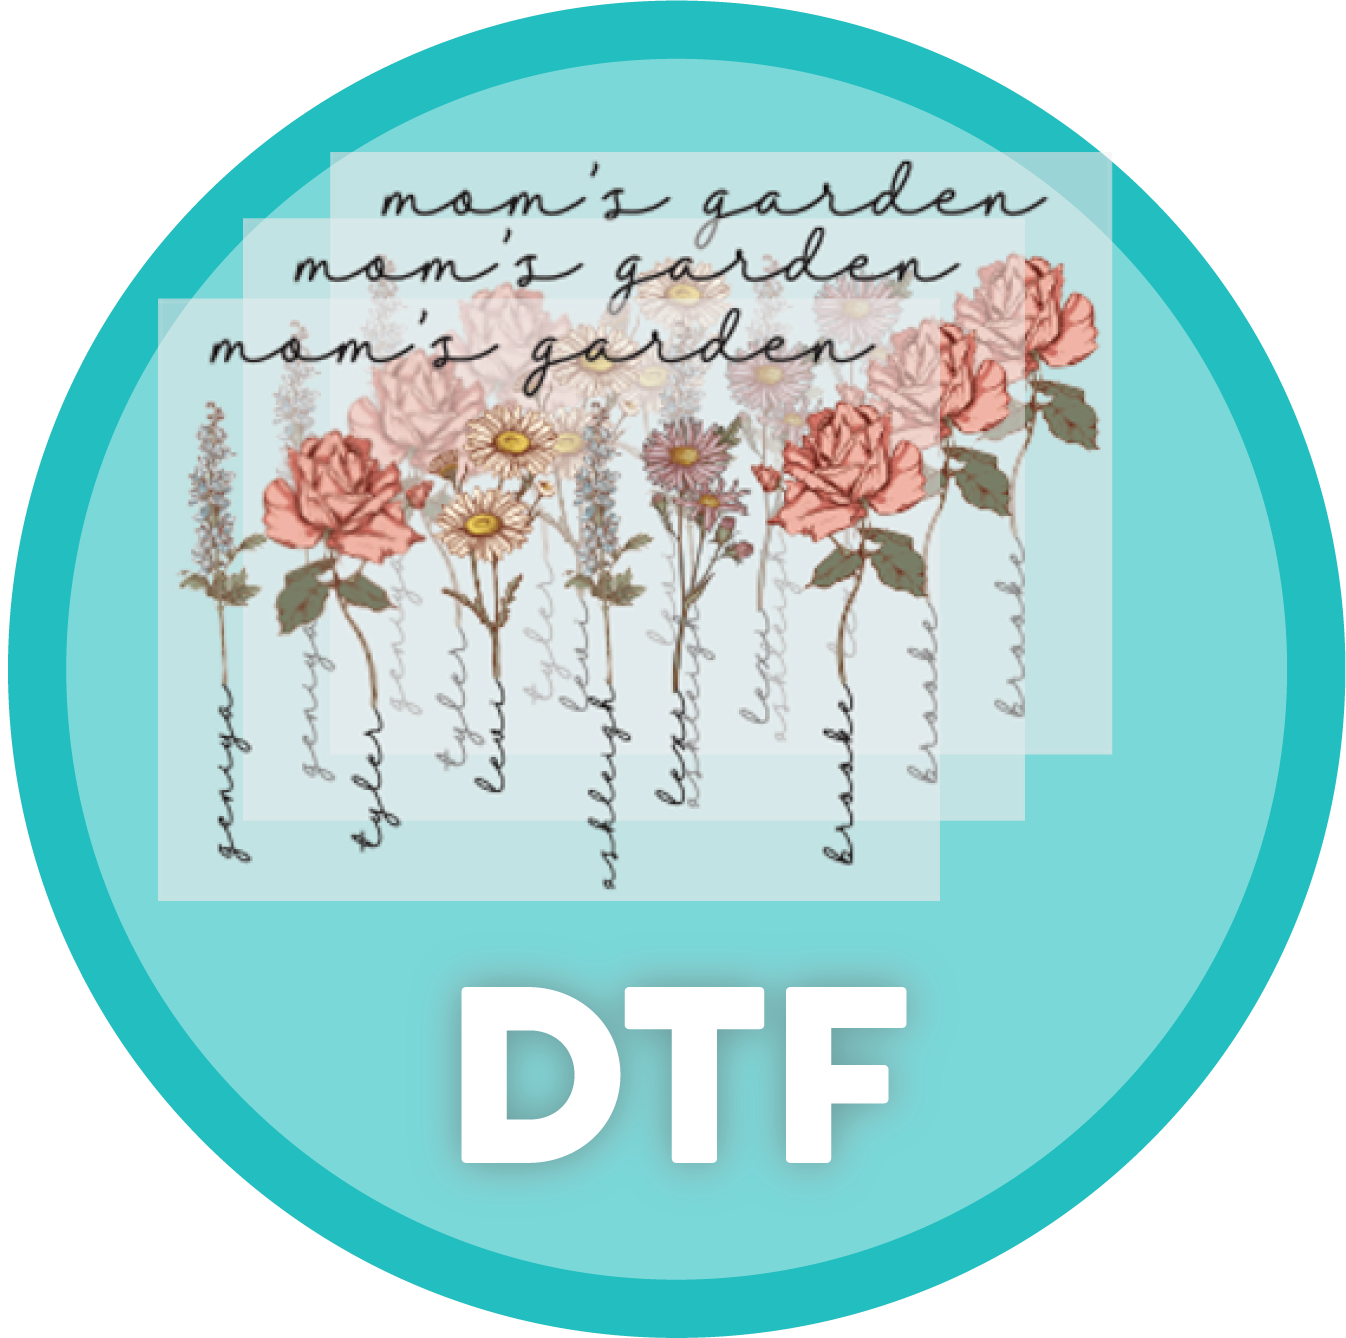 Custom Create Your Own Iron on DTF Direct to Film Transfer Sticker, DIY Images/Text/Logo Printing Clothing Personalized Iron on Design Family Party